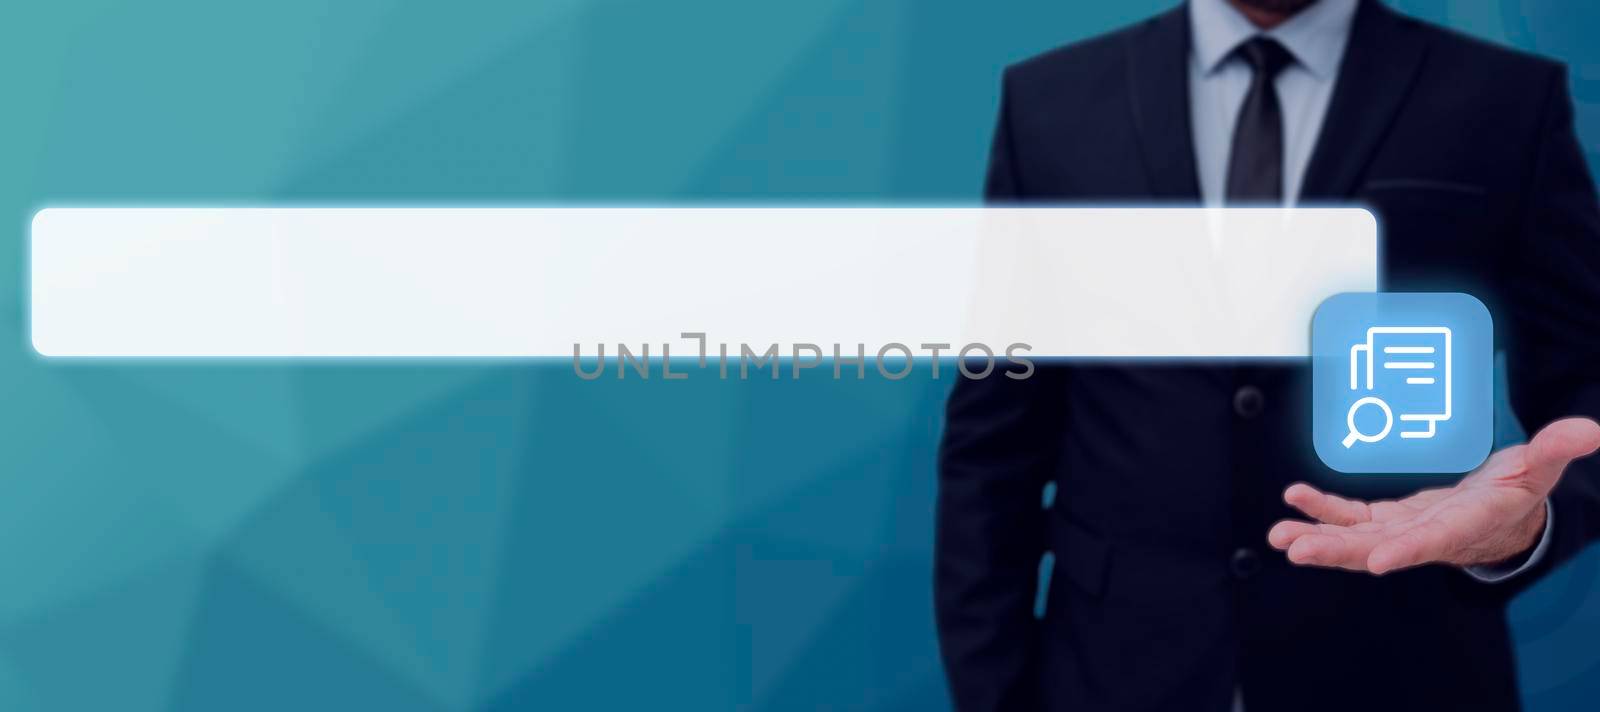 Businessman Presenting The Document Search Bar In Abstract Design. Man In Suit With One Hand Displaying The Search Looking For Important Files And Data. by nialowwa